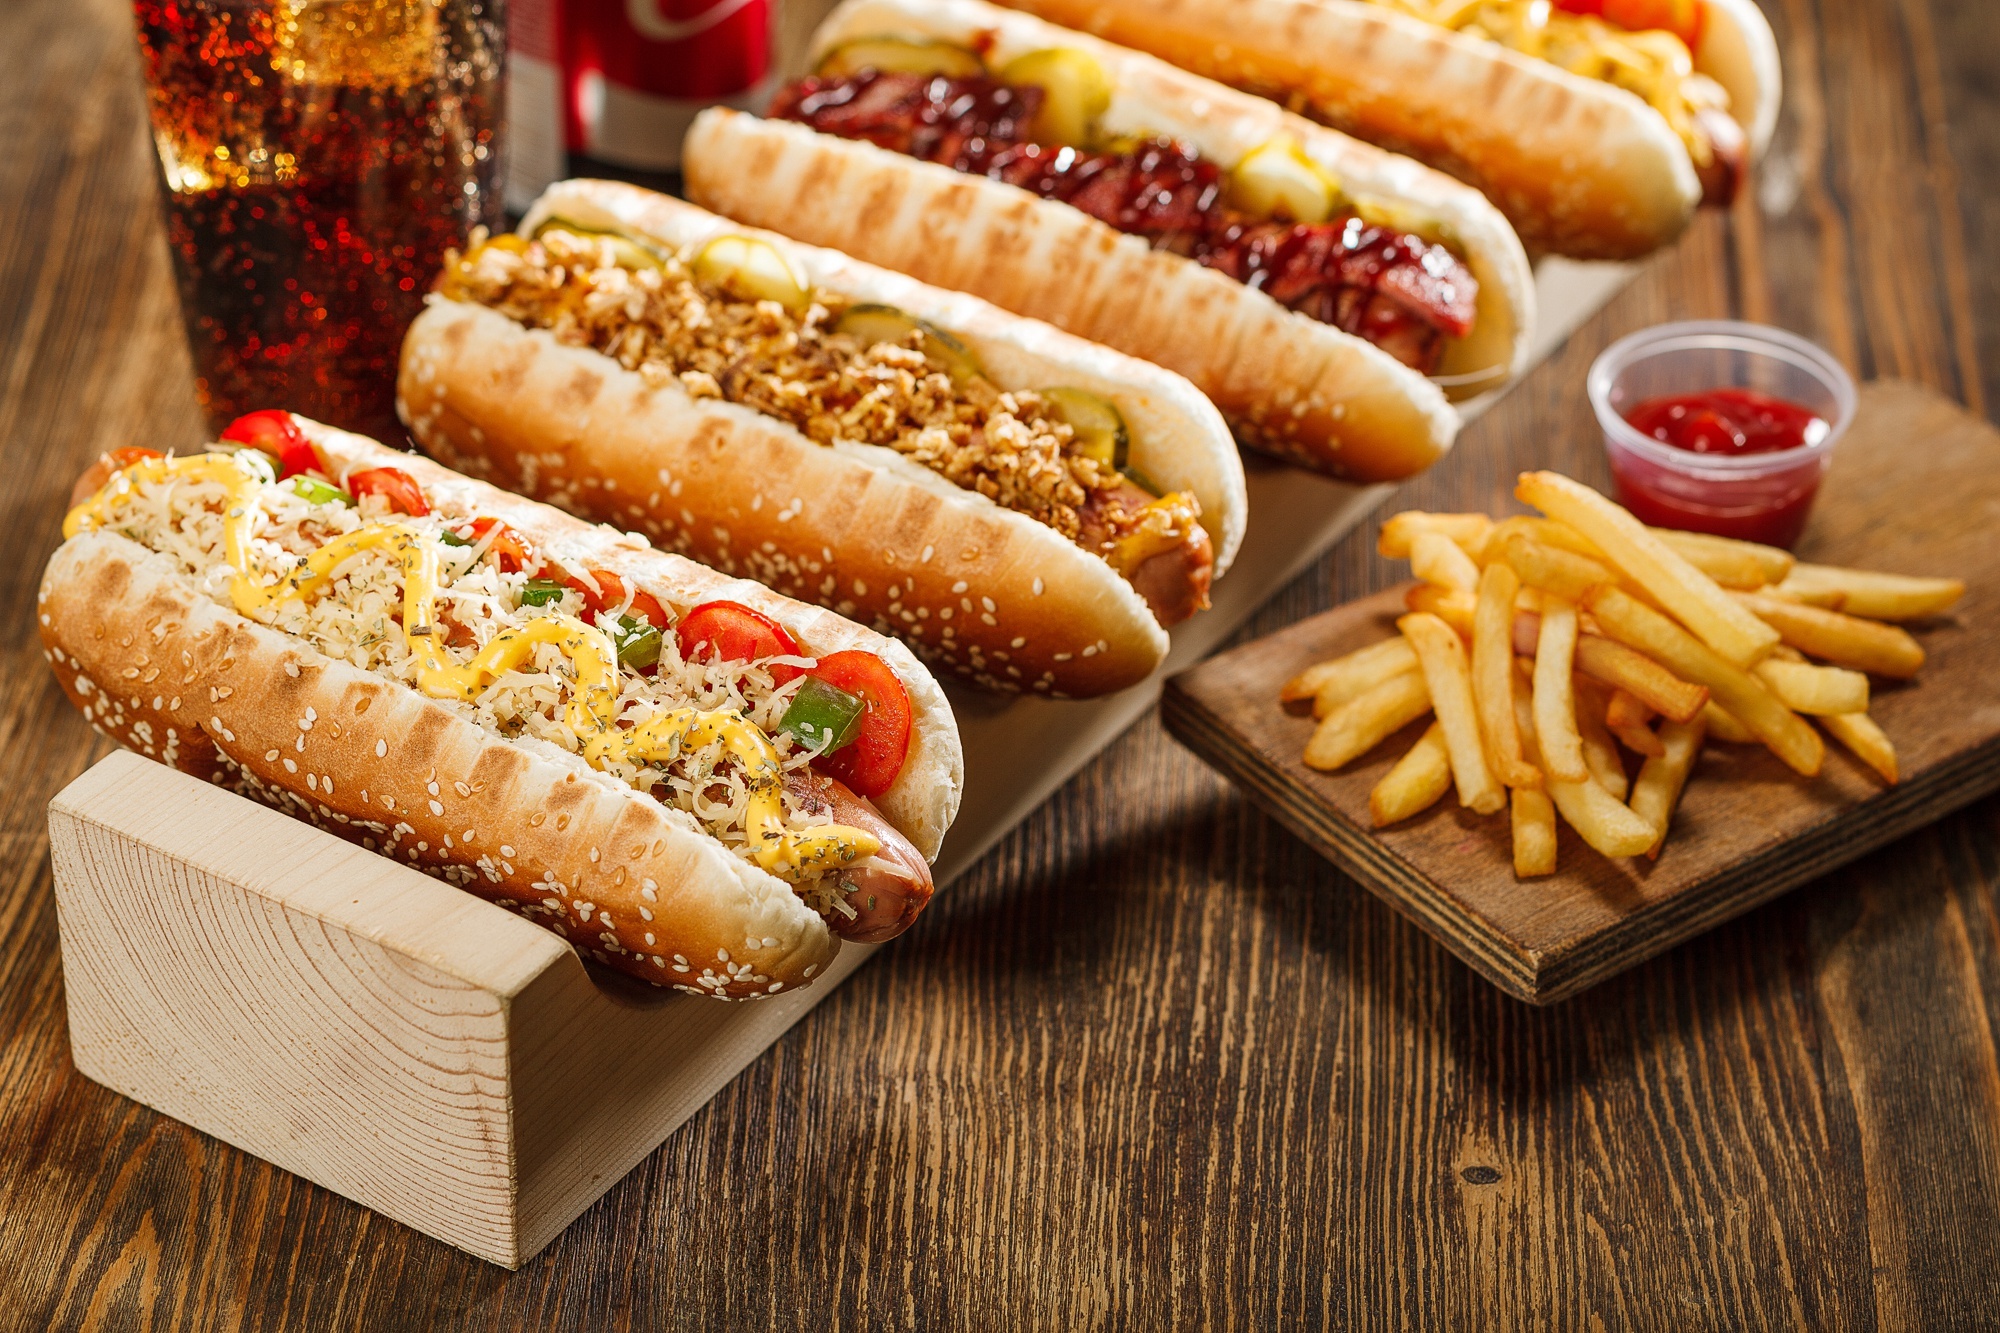 Hot dog HD wallpapers, Background images, Food photography, Culinary art, 2000x1340 HD Desktop